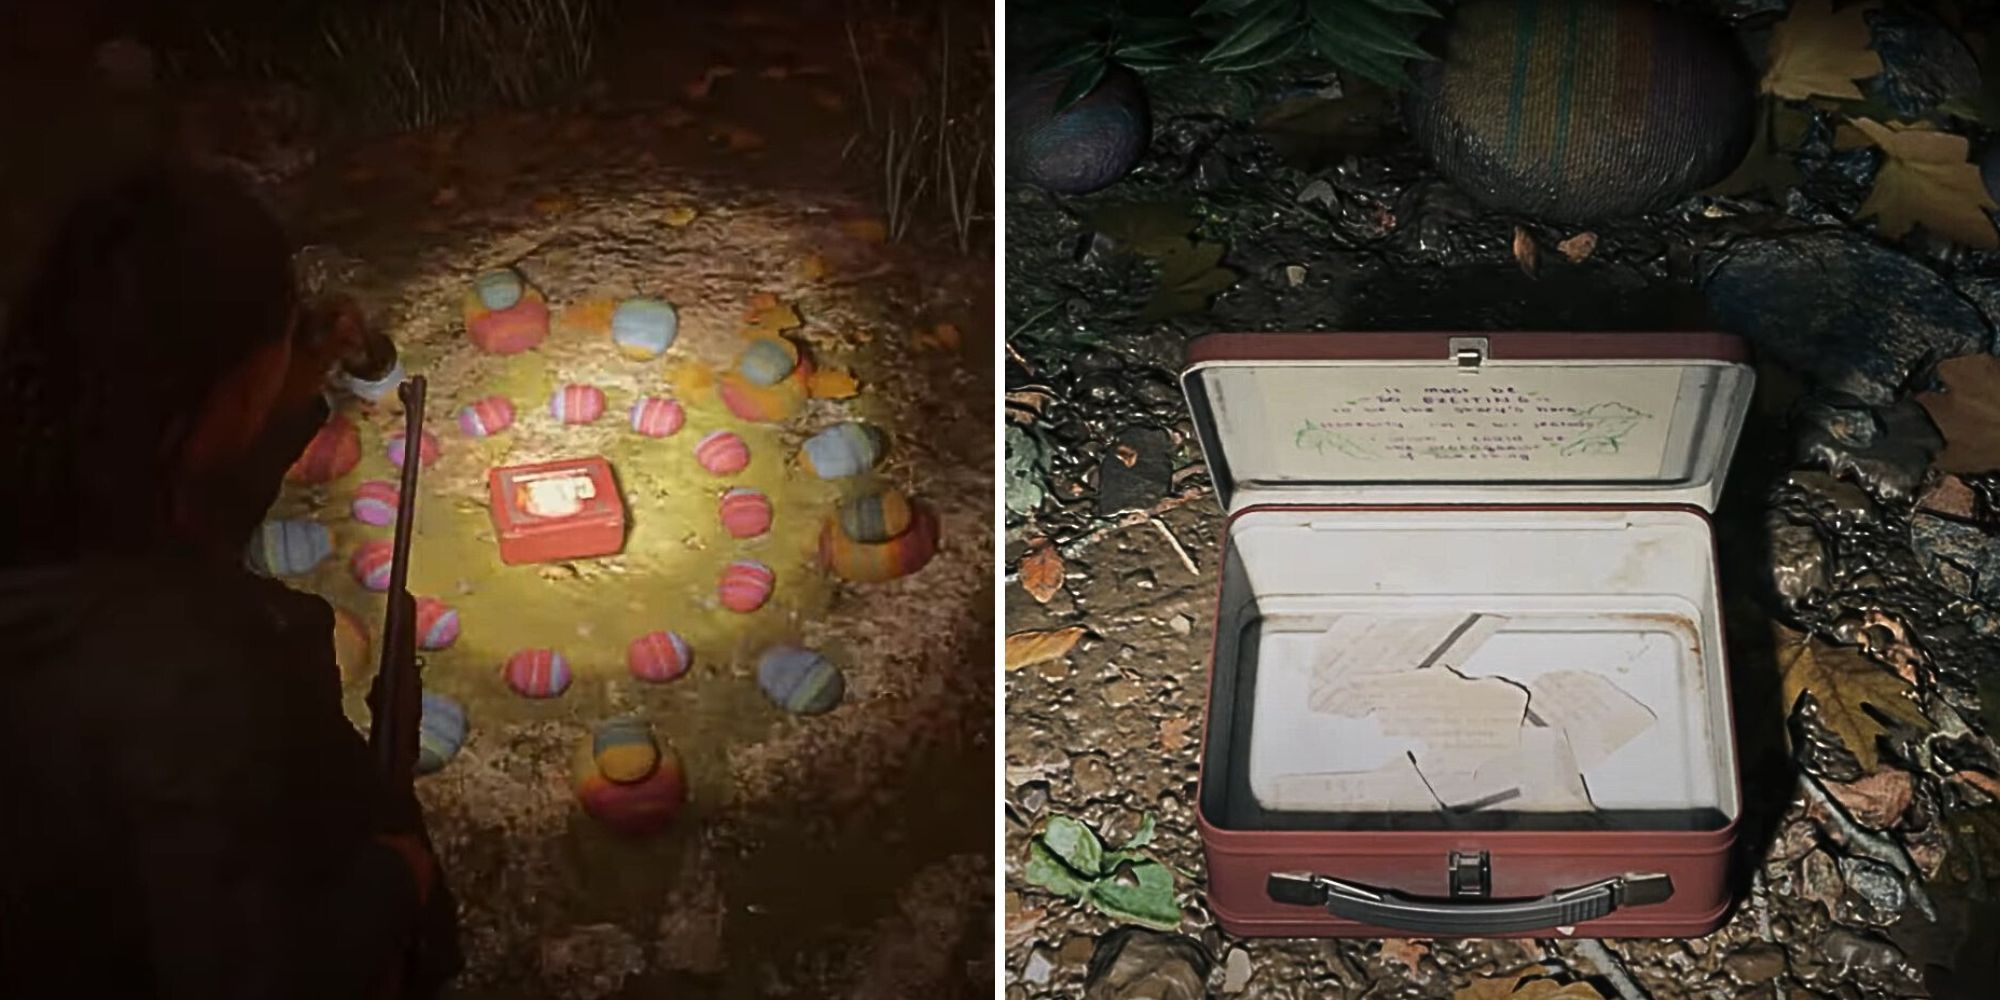 The Alan Wake 2 character is finding lunch box collectibles with manuscript fragments in them.